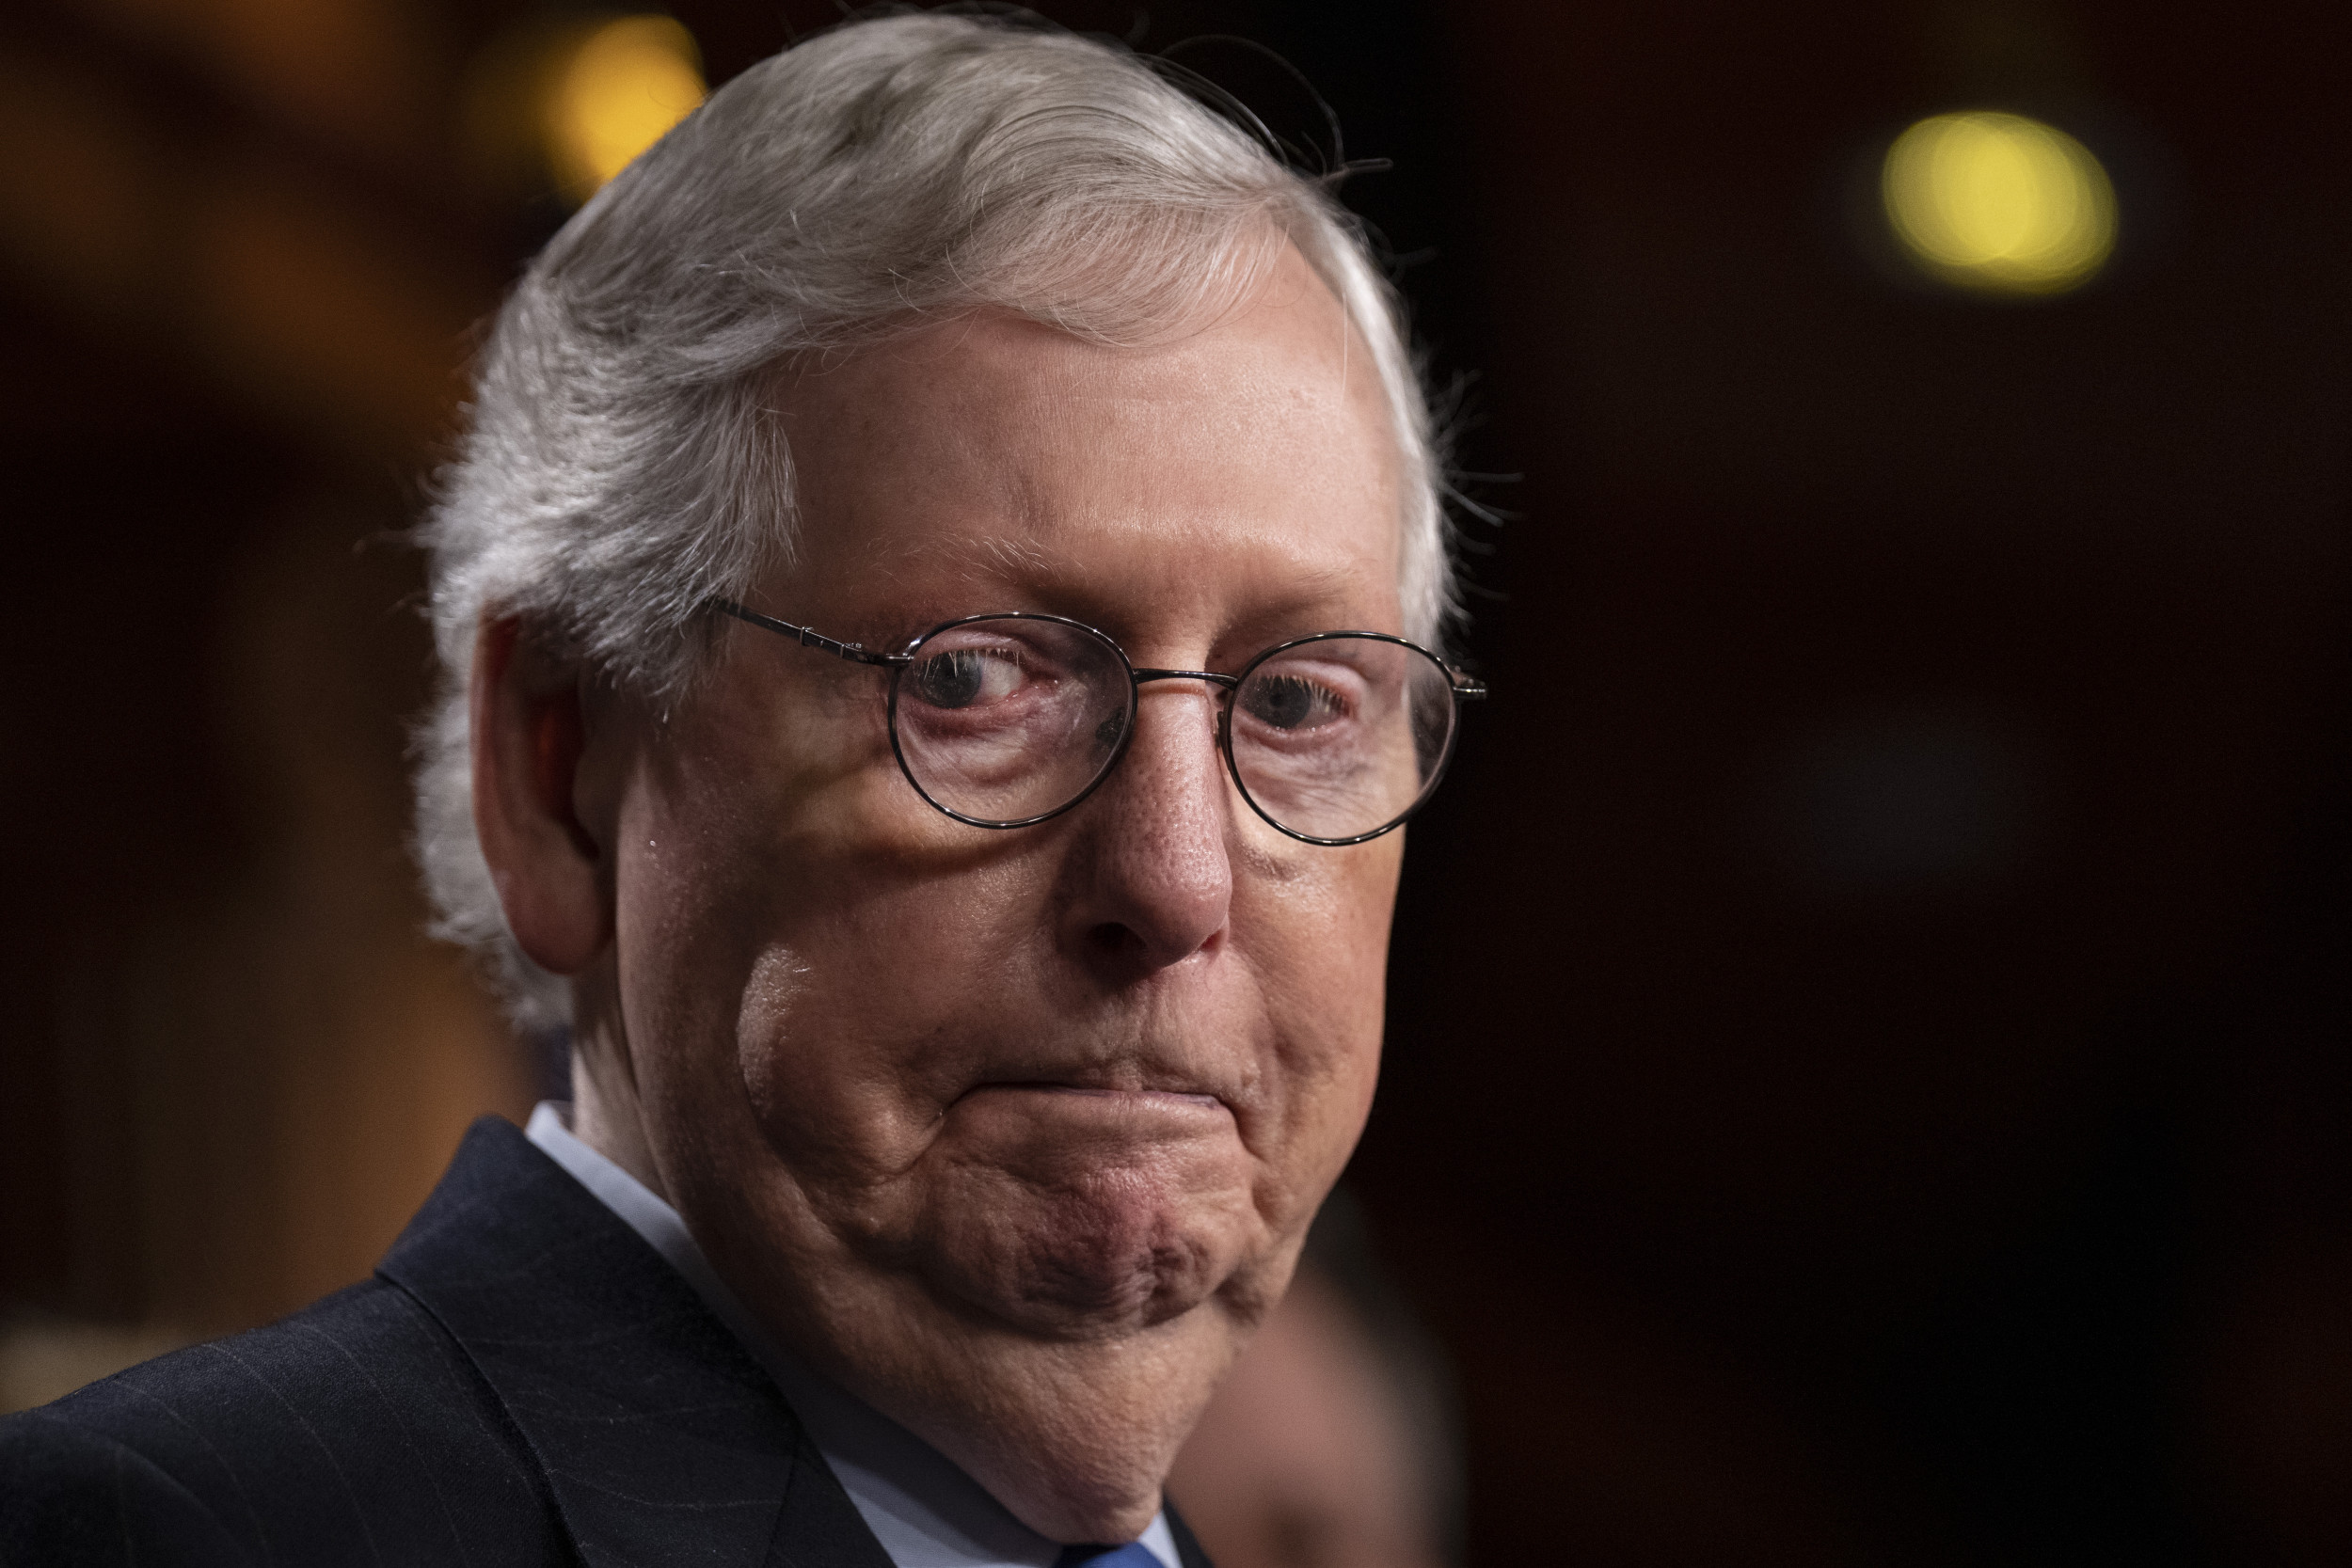 Mitch McConnell Votes Against Interracial Marriage Bill Despite Asian Wife